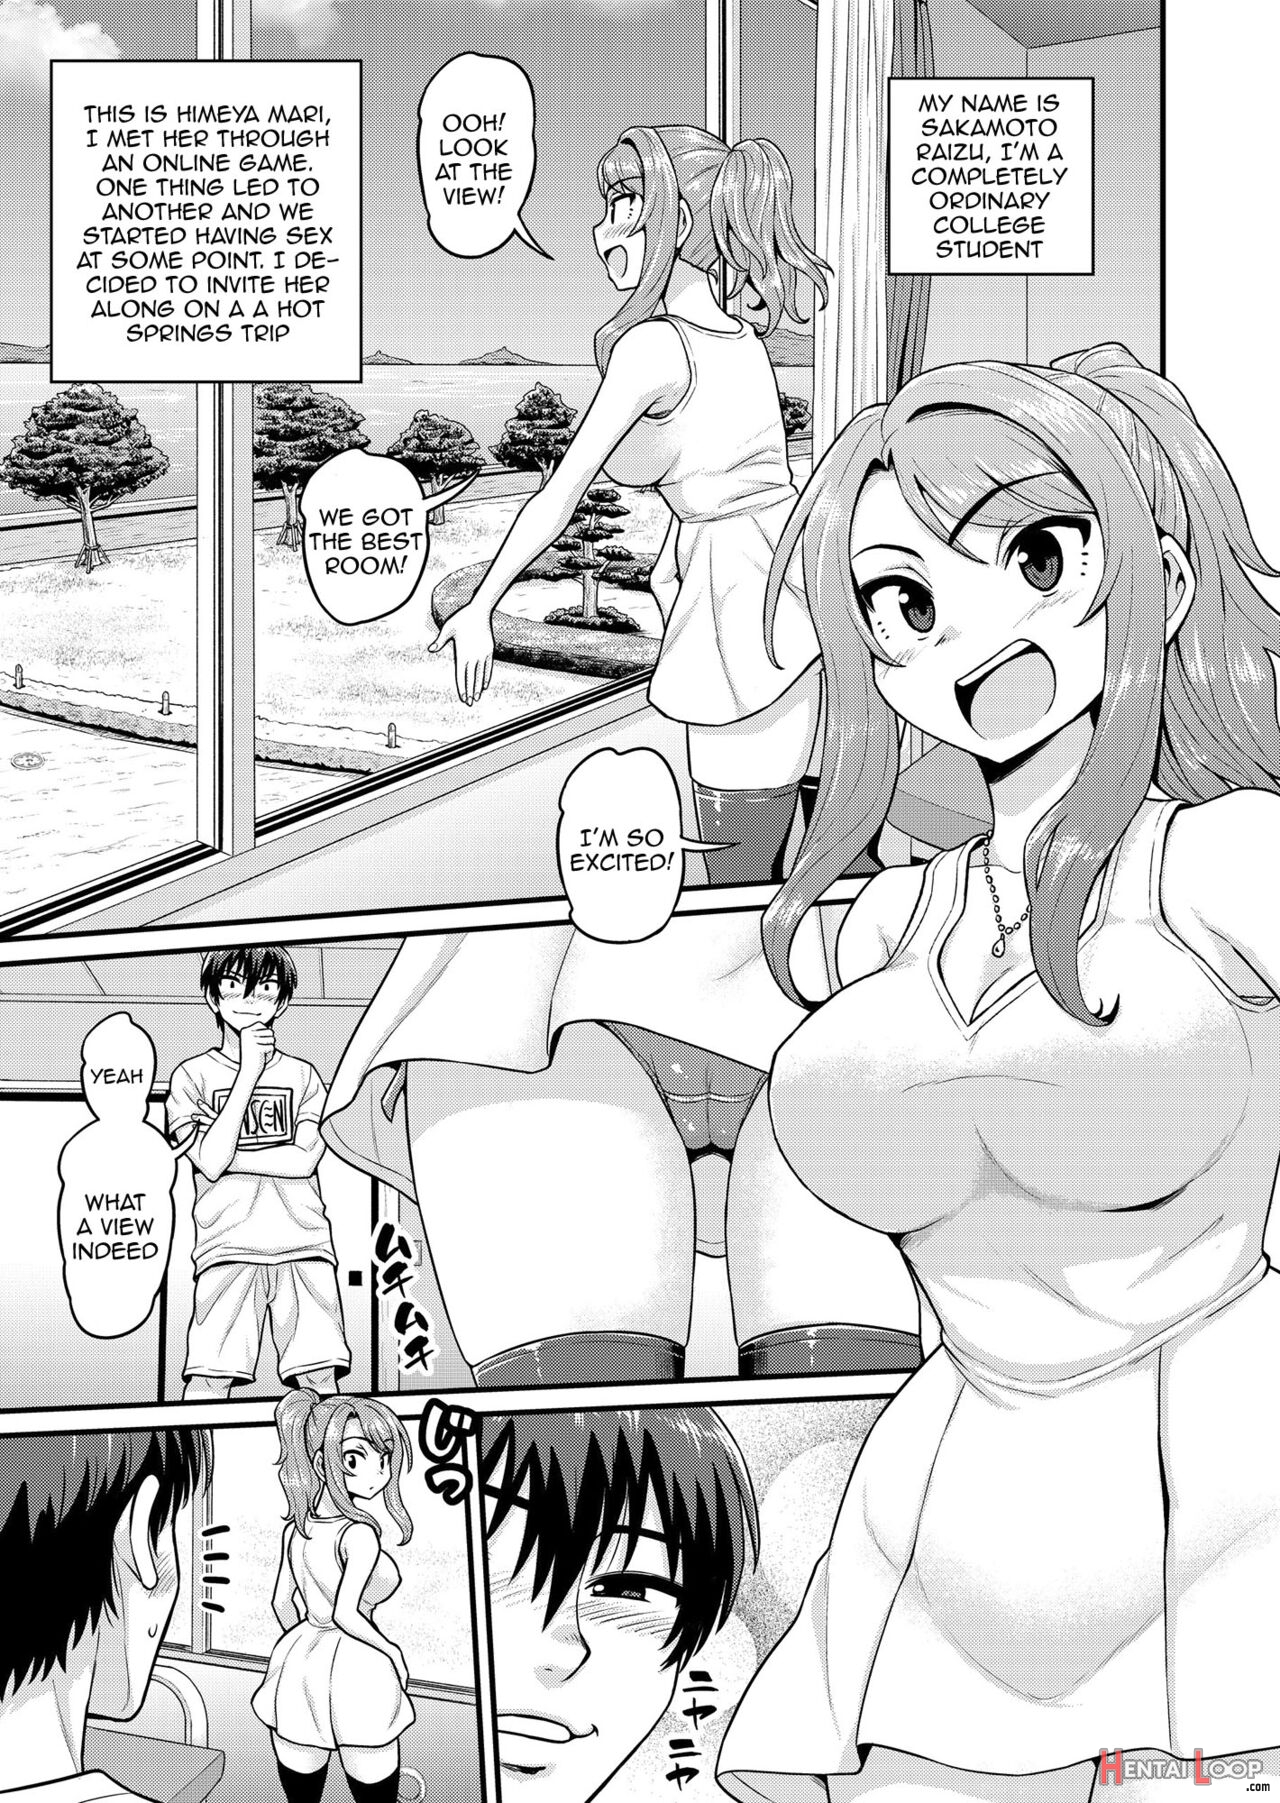 Smashing With Your Gamer Girl Friend At The Hot Spring - Ntr Version page 2